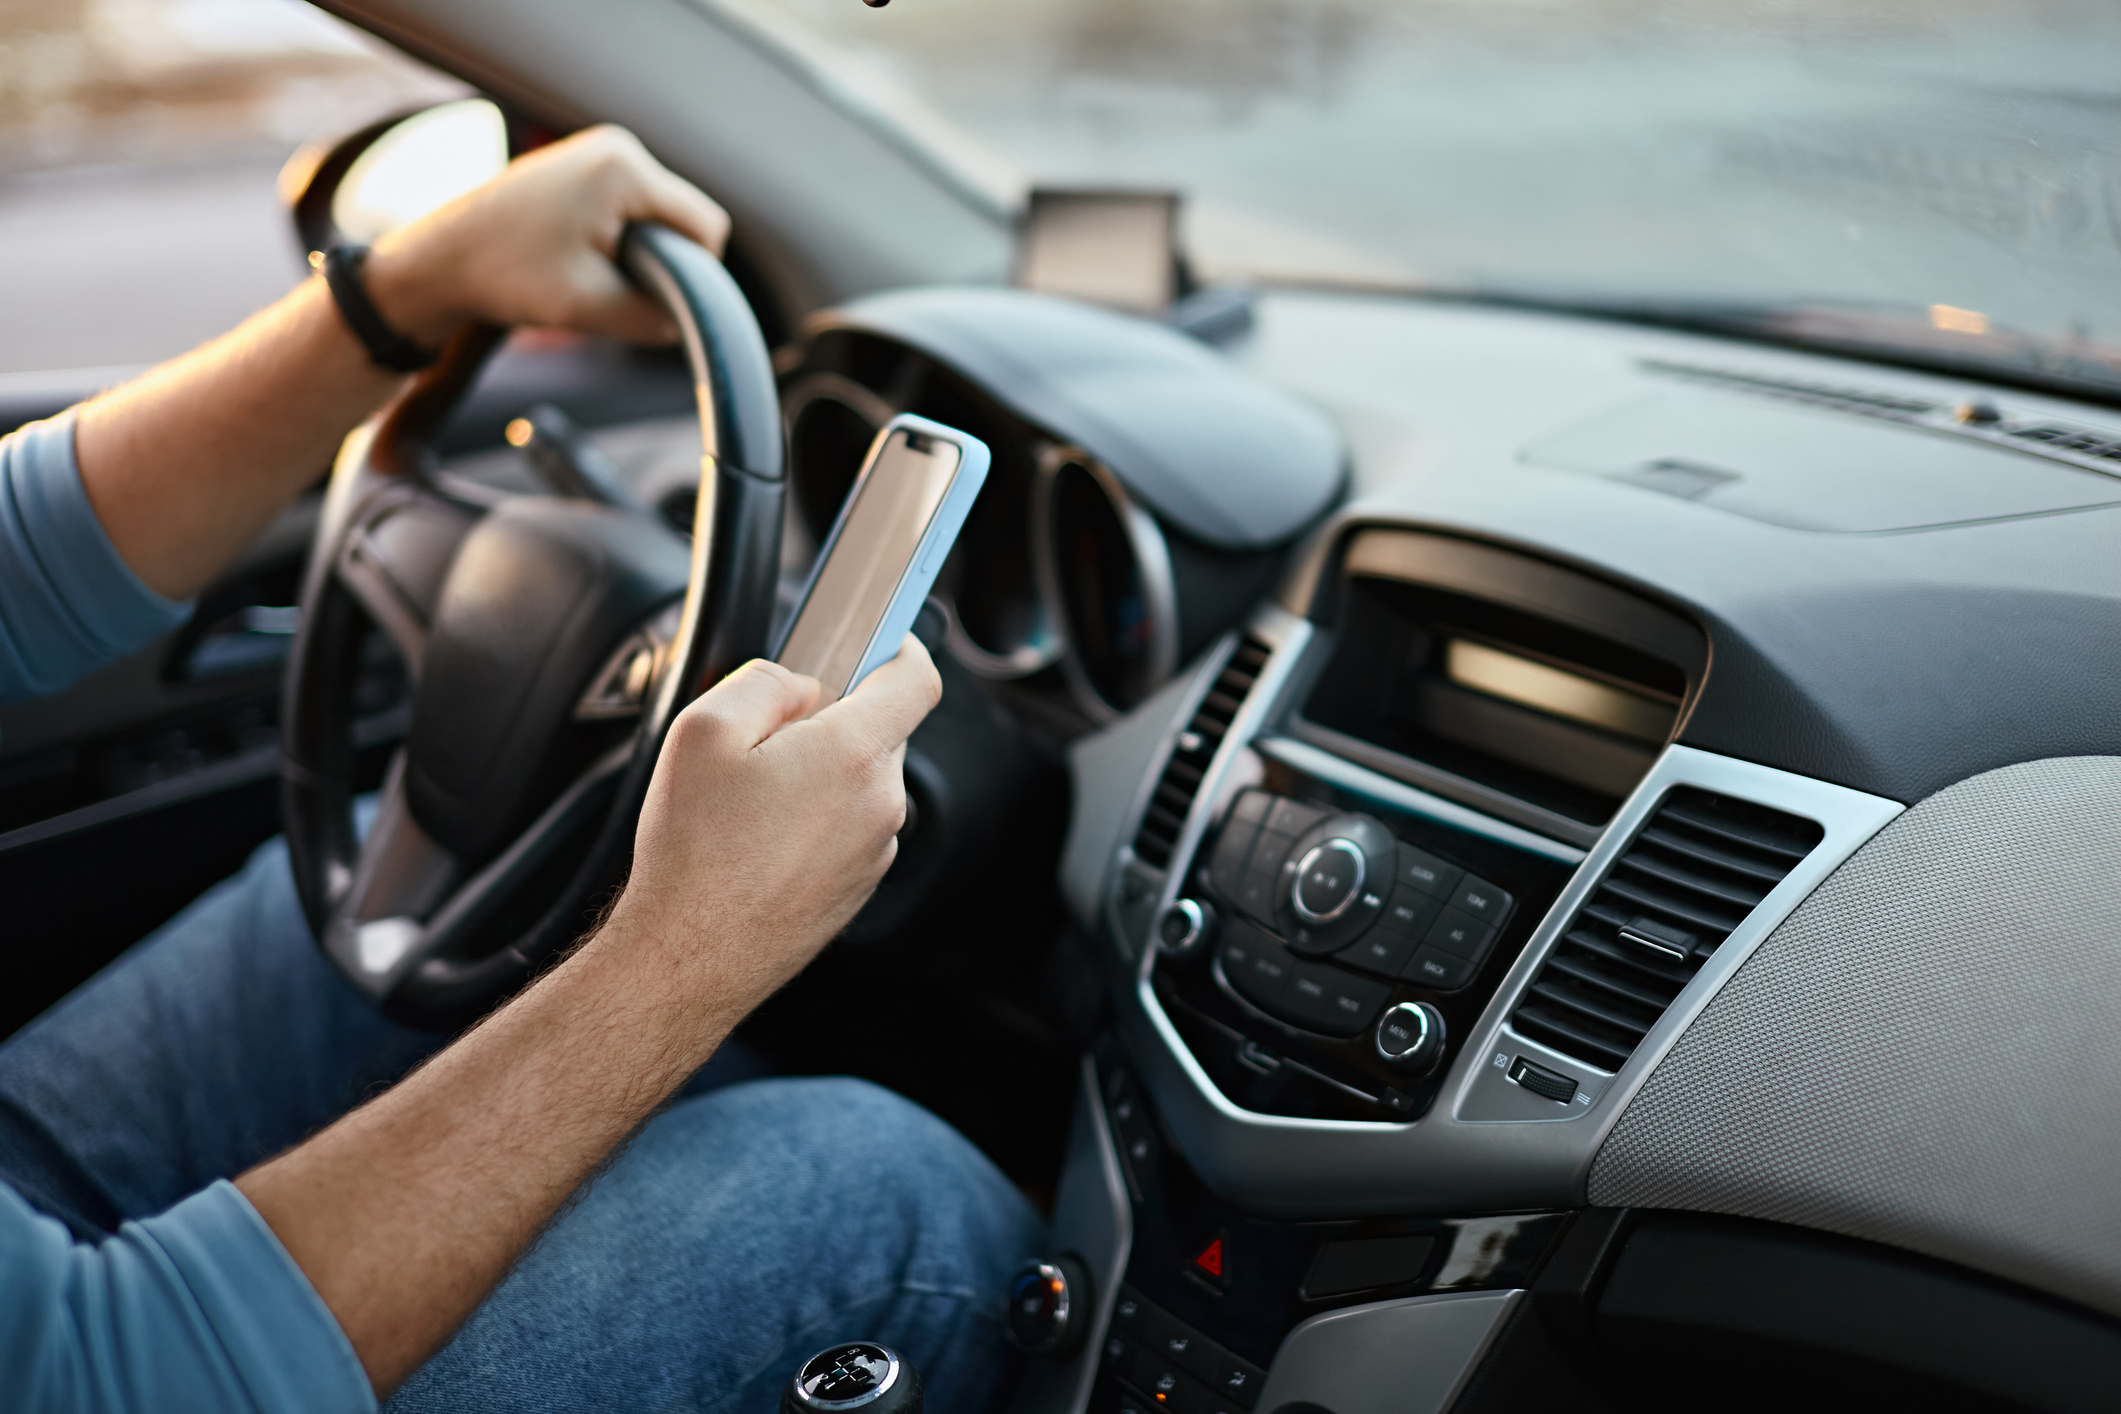 Driver using mobile phone while driving. (Photo: iStock - perfectlab)